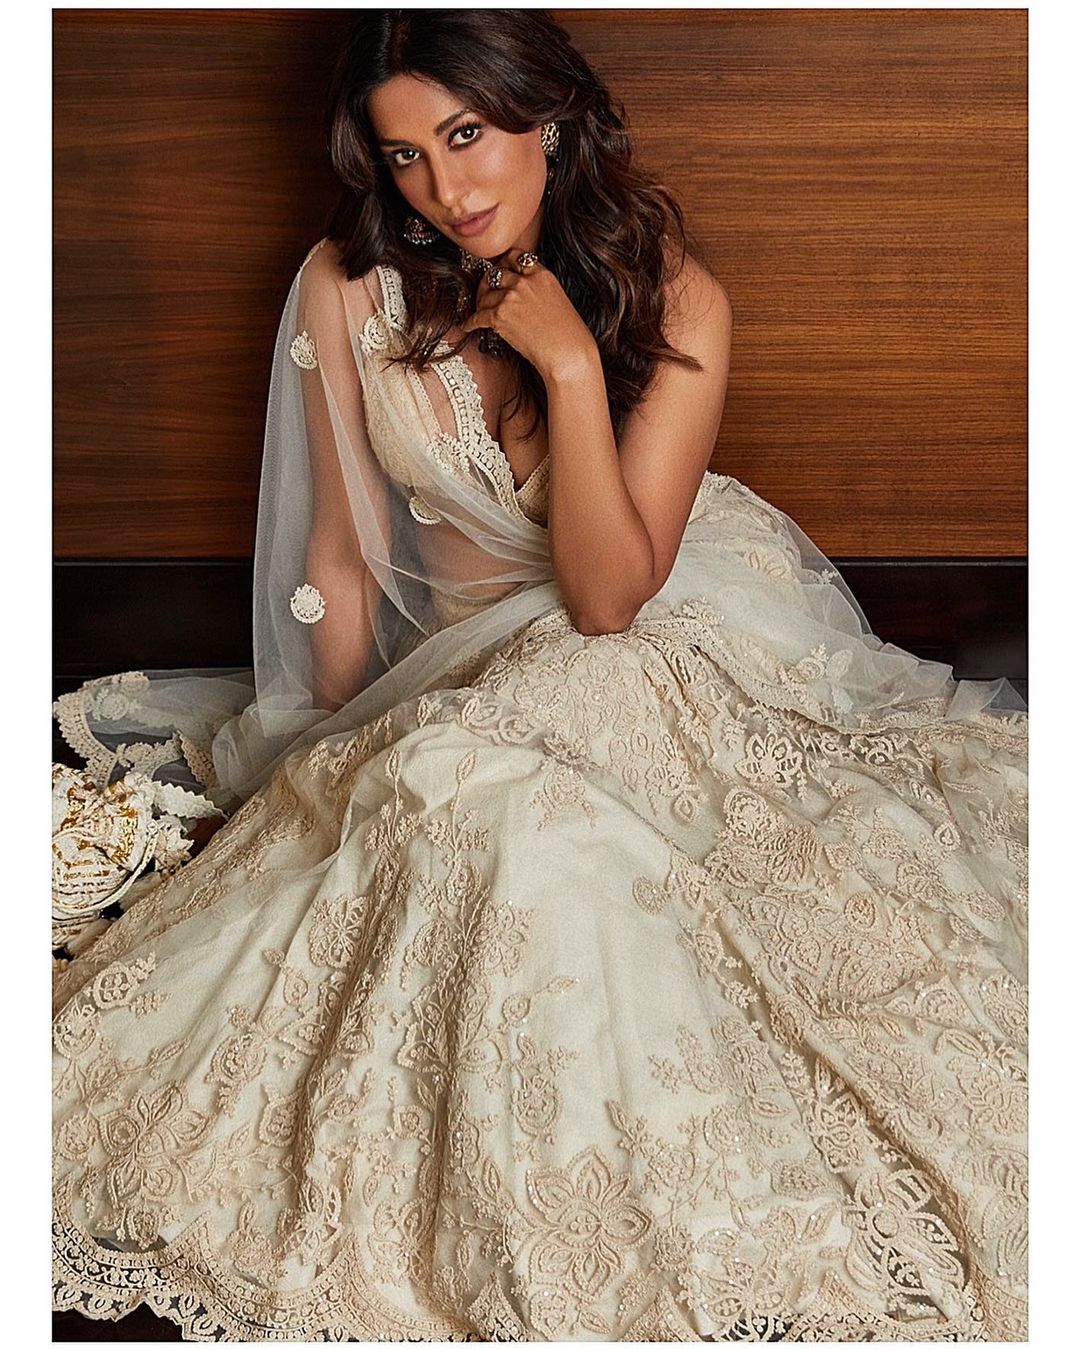 Chitrangda Singh paints a pretty picture in the white lehenga.